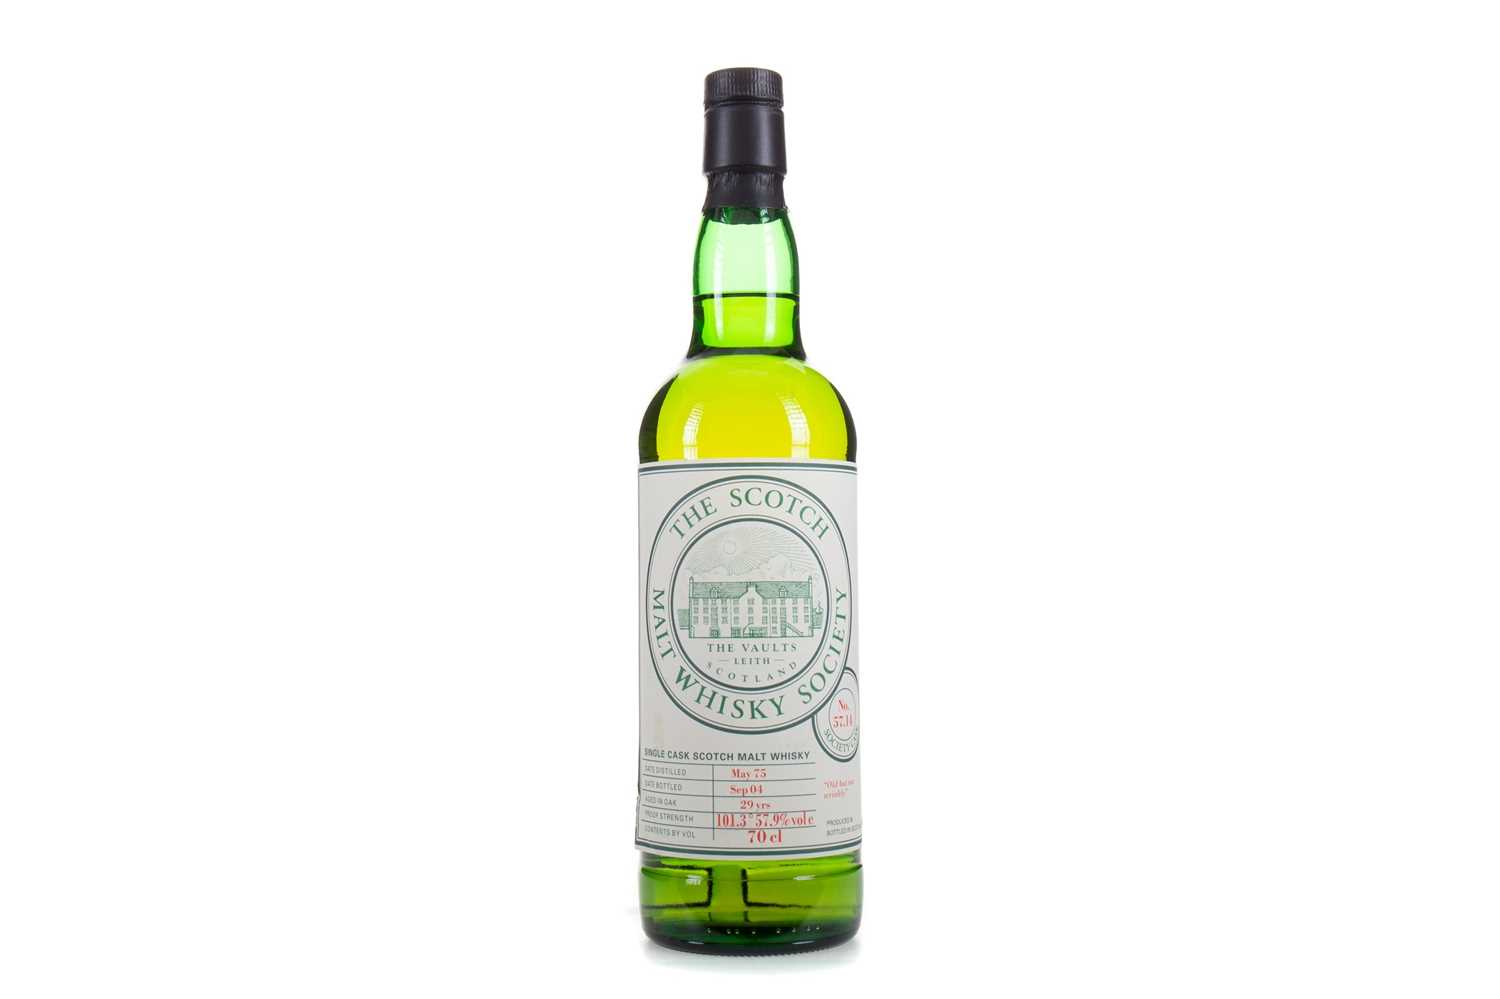 Lot 11 - SMWS 57.14 GLEN MHOR 1975 29 YEAR OLD